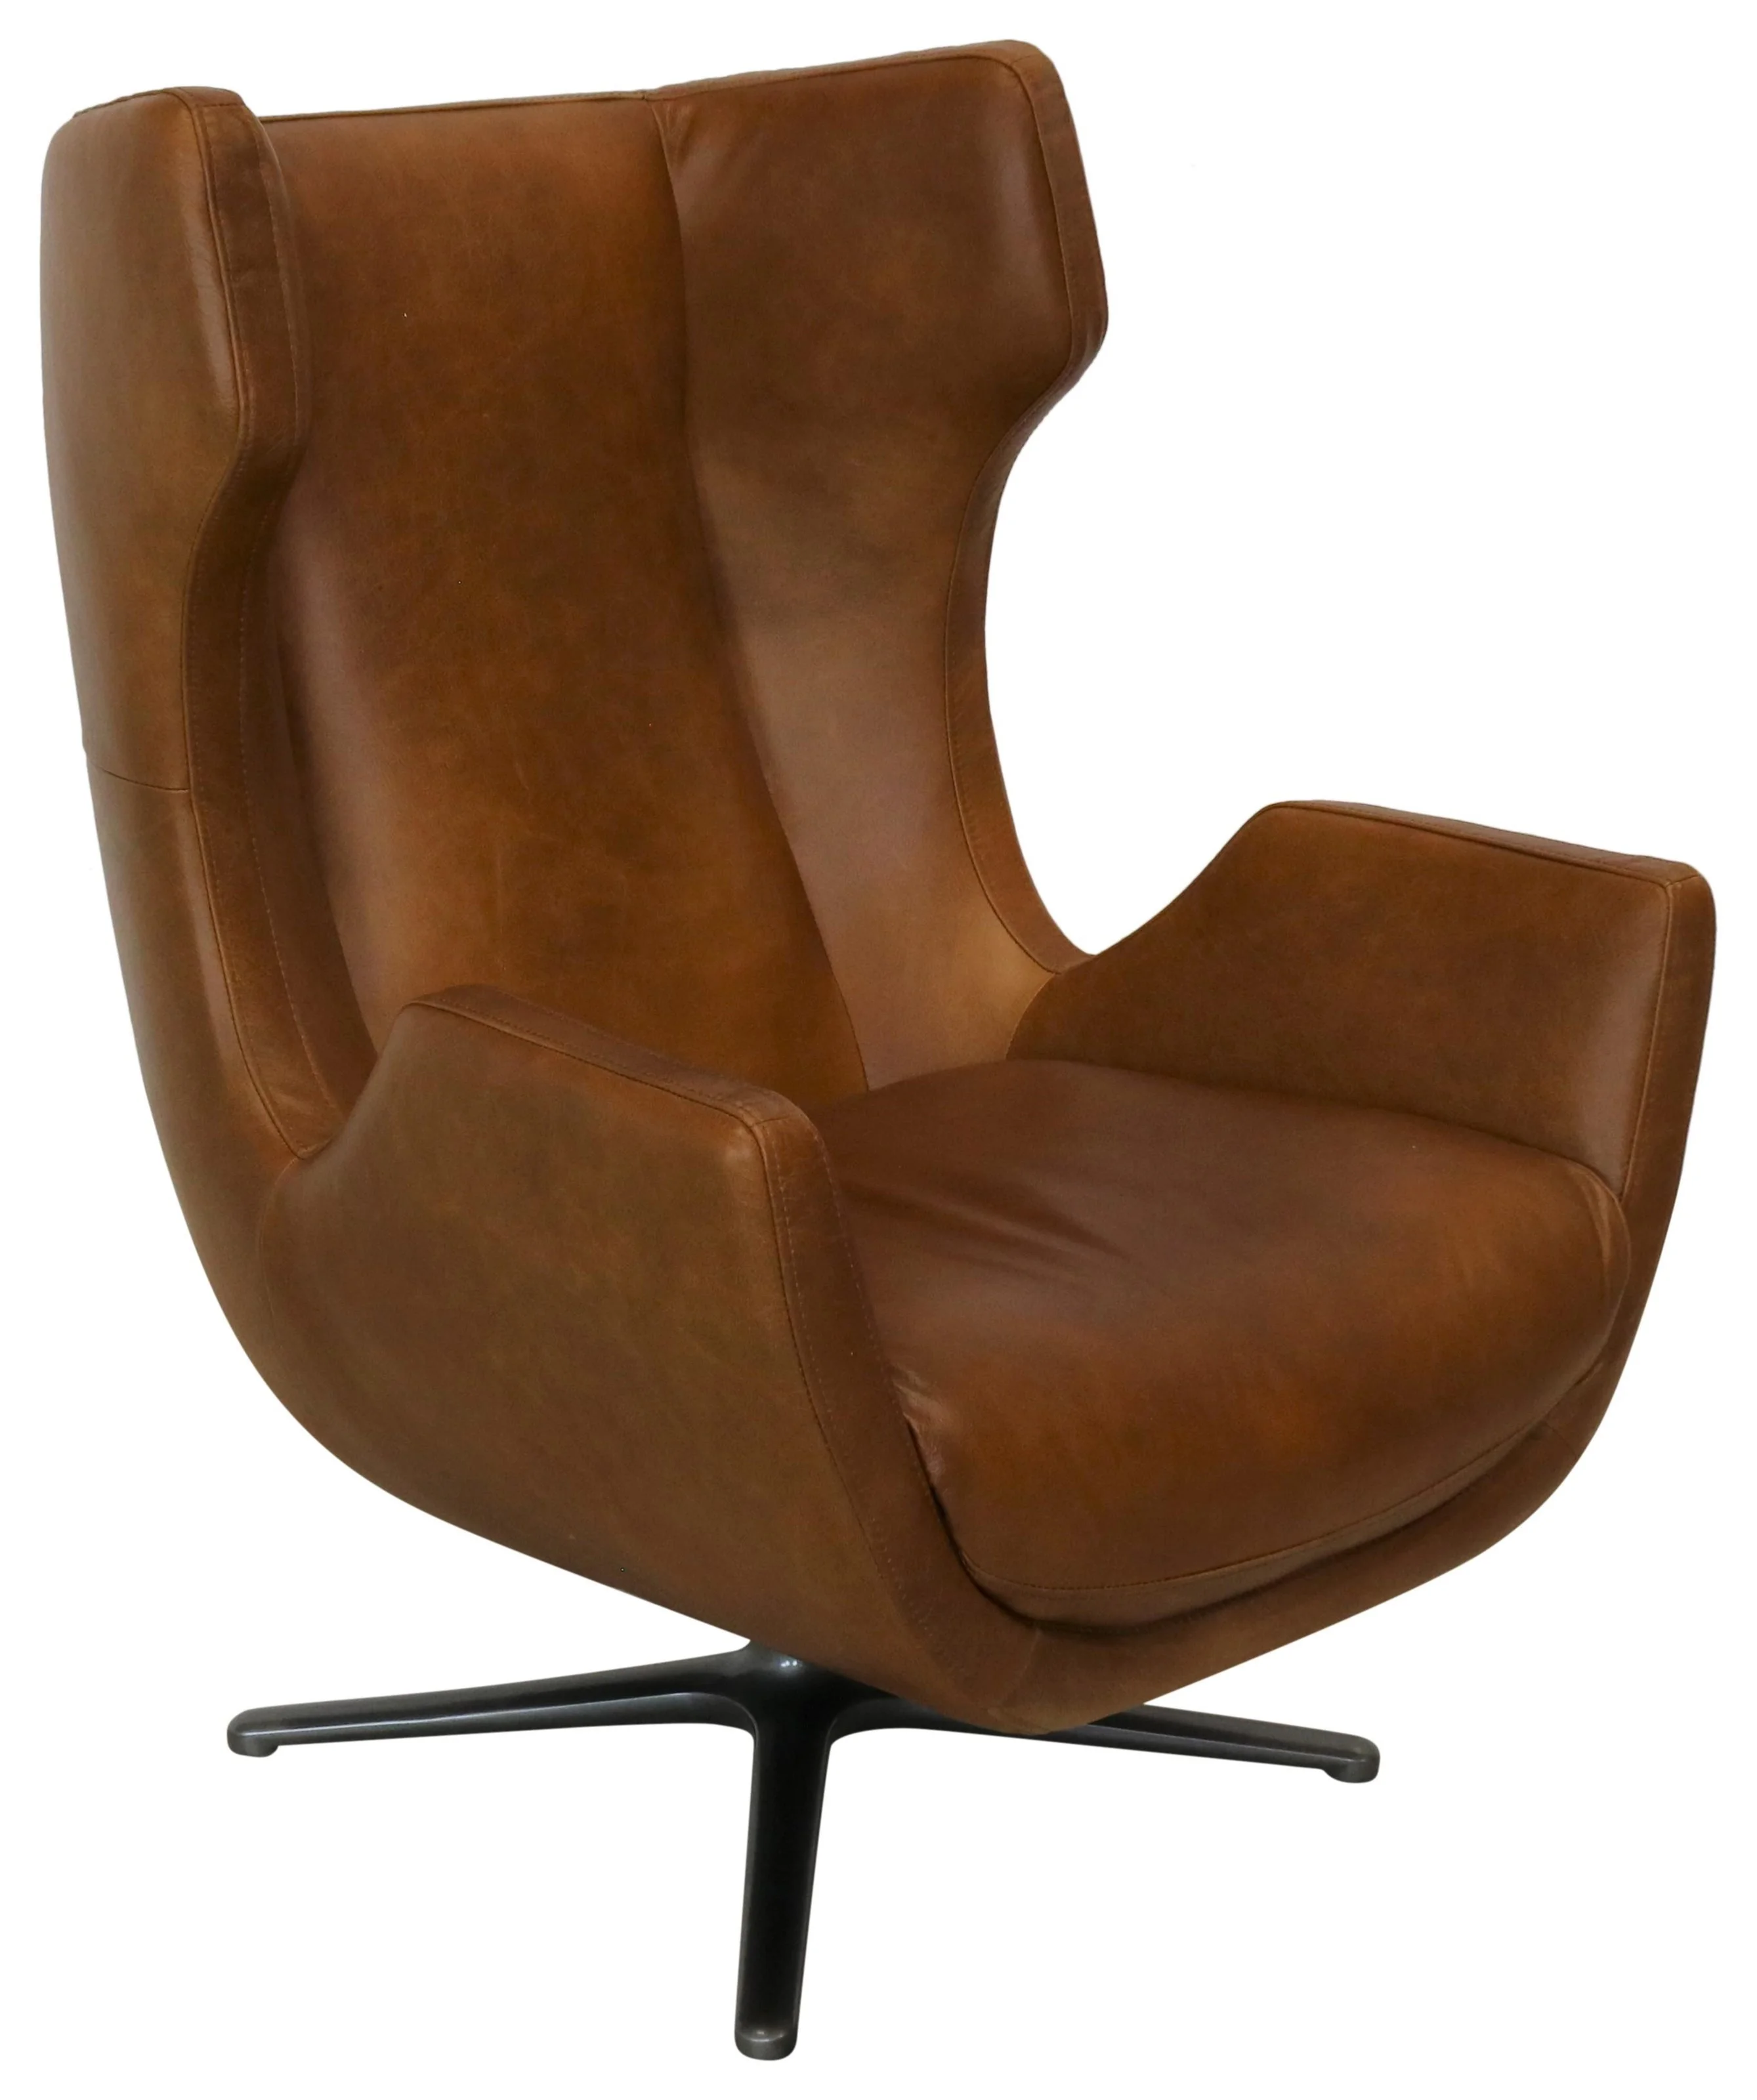 Kayla Home Upholstered Accents Leather Swivel Chair Sprintz Furniture | Chairs